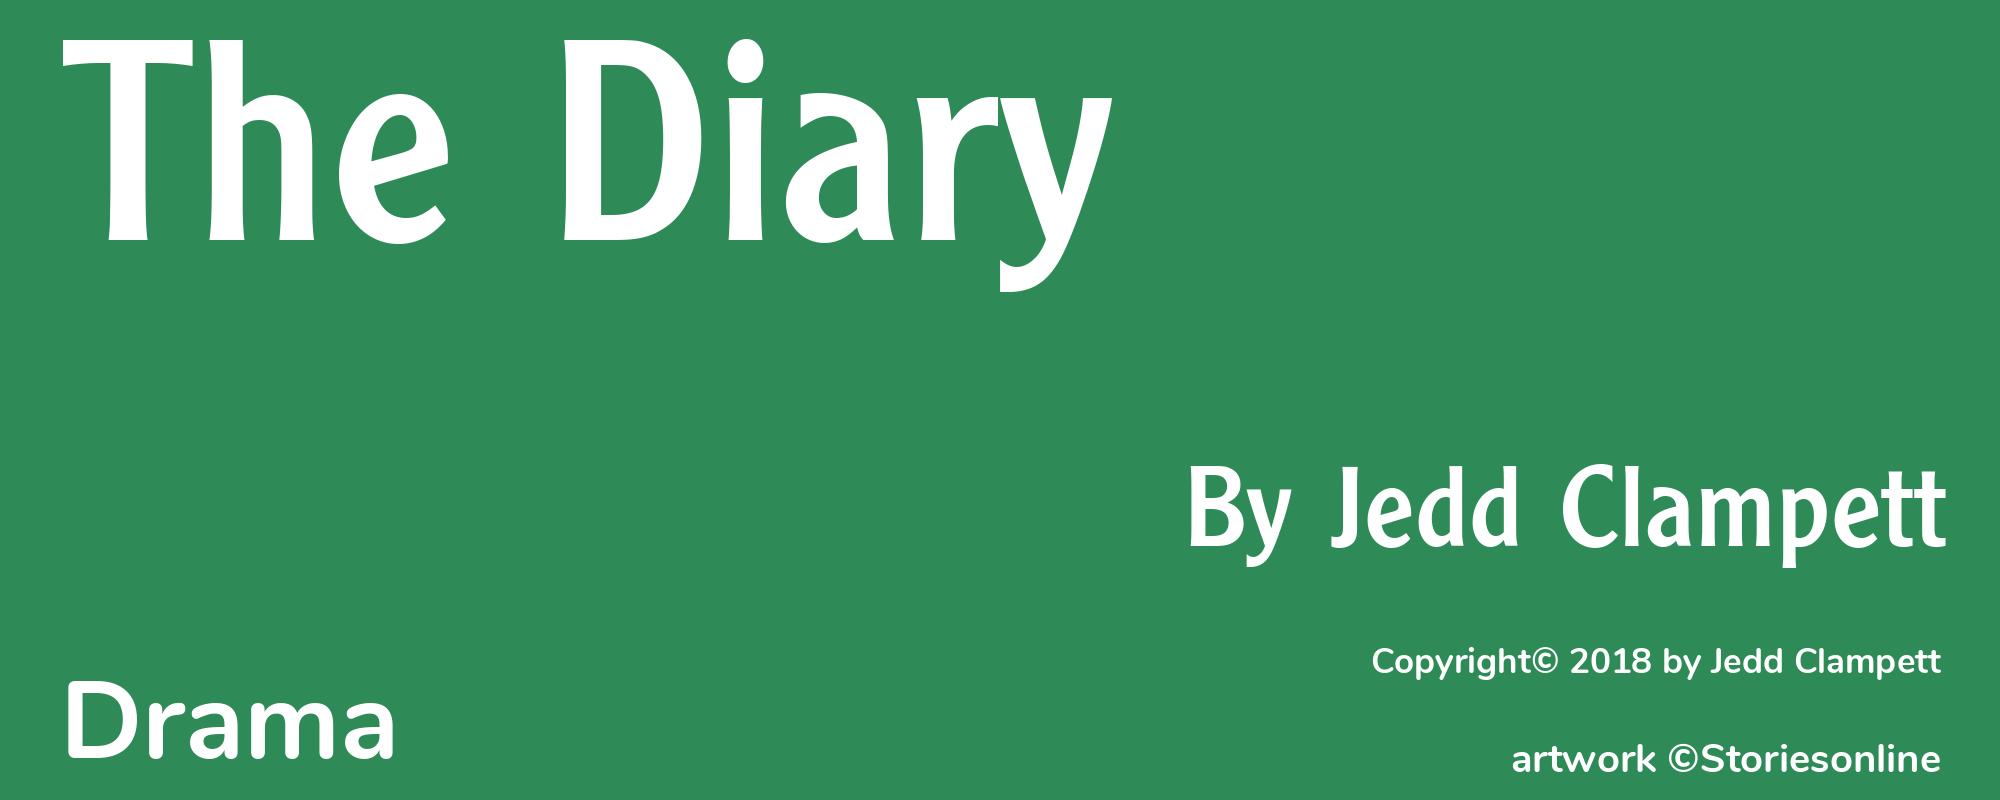 The Diary - Cover